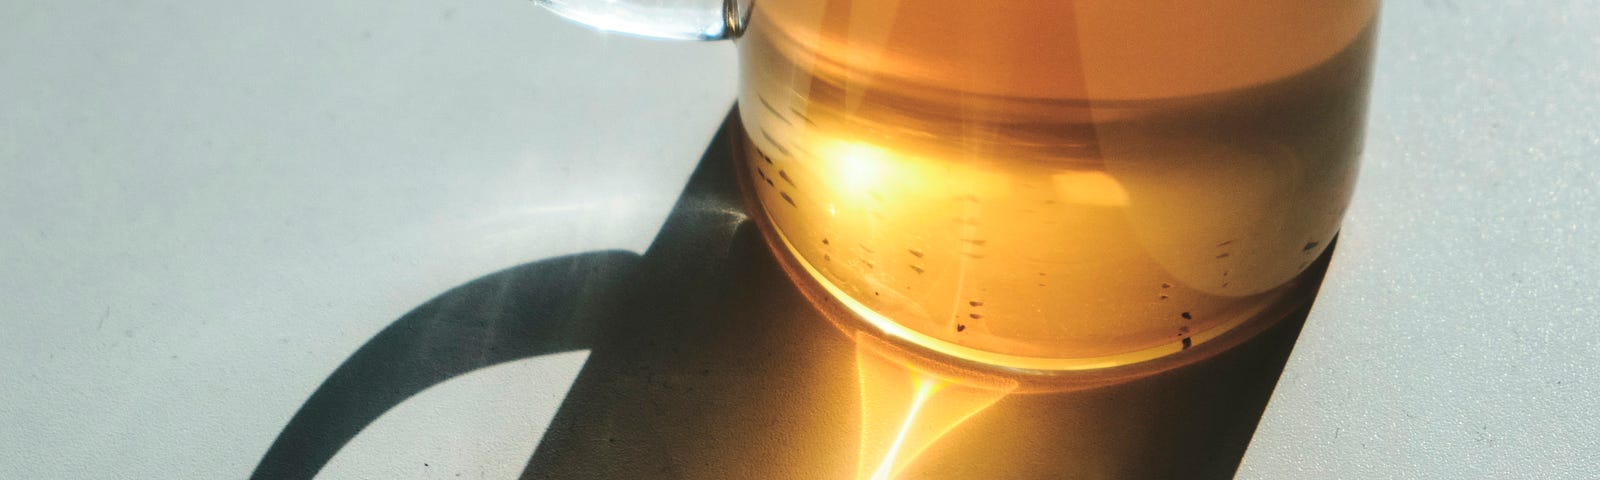 Golden tea filling a glass tea cup with the sun shining through it